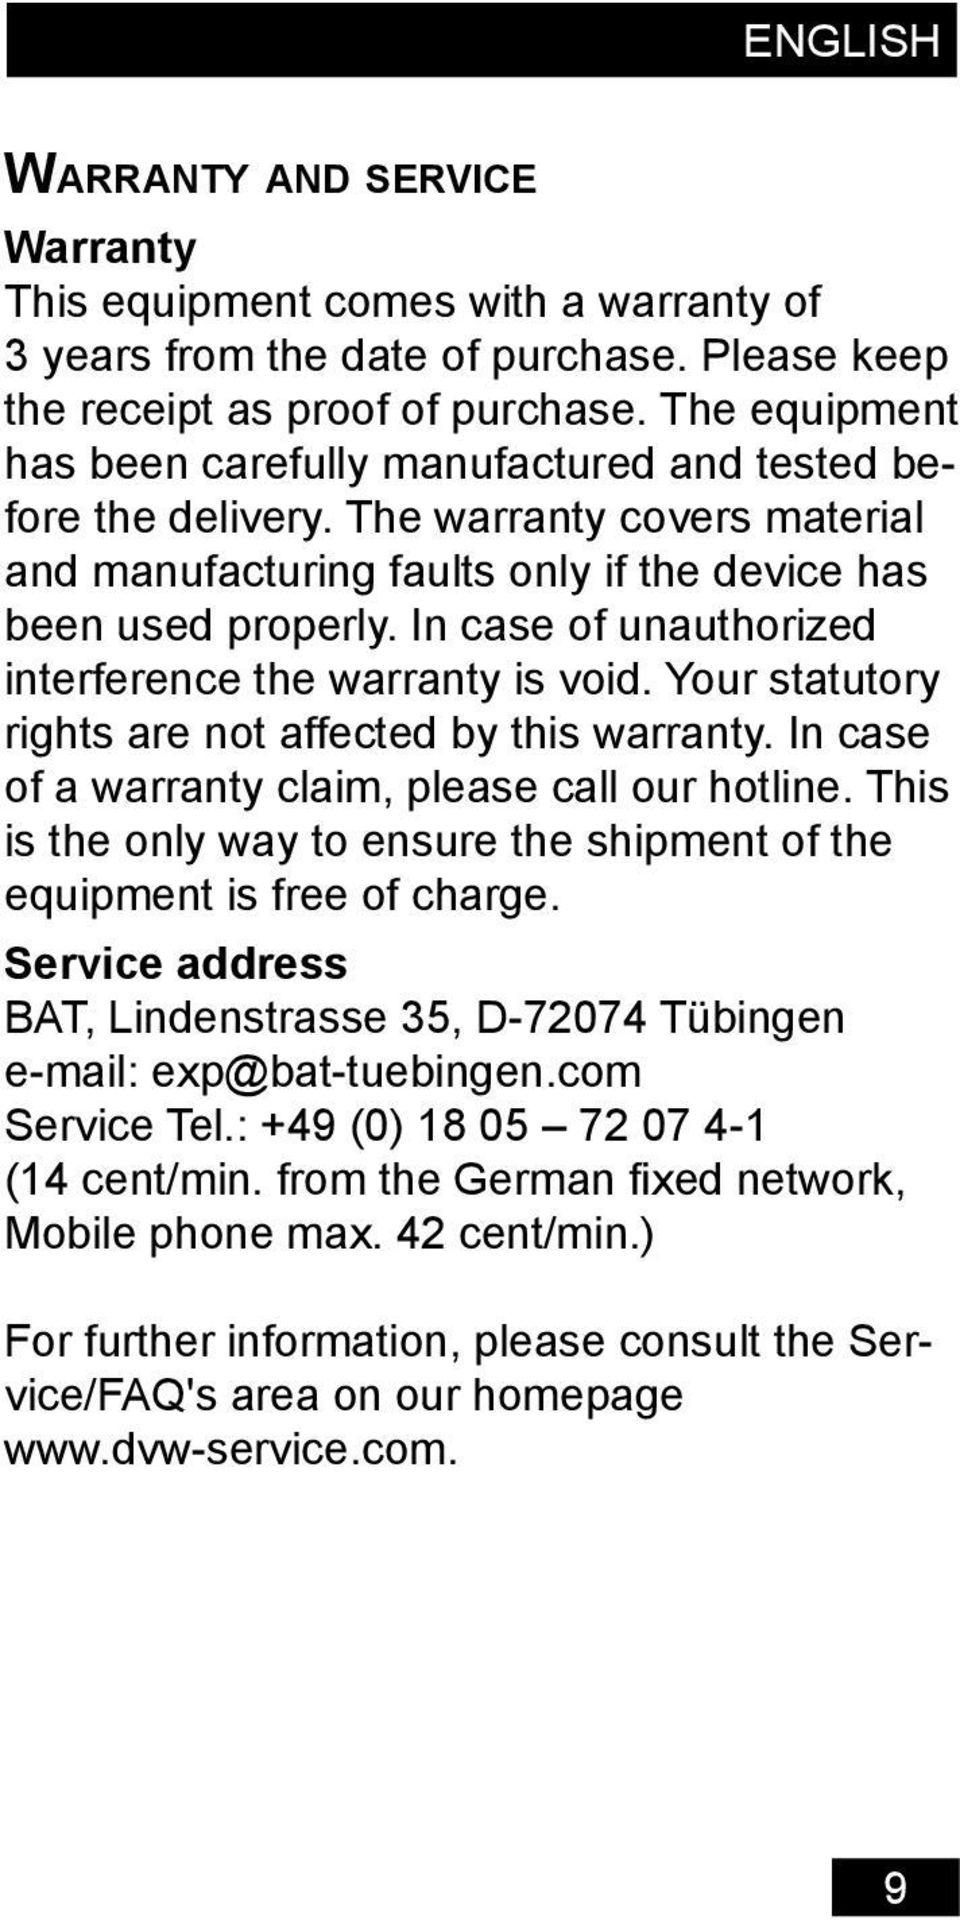 In case of unauthorized interference the warranty is void. Your statutory rights are not affected by this warranty. In case of a warranty claim, please call our hotline.